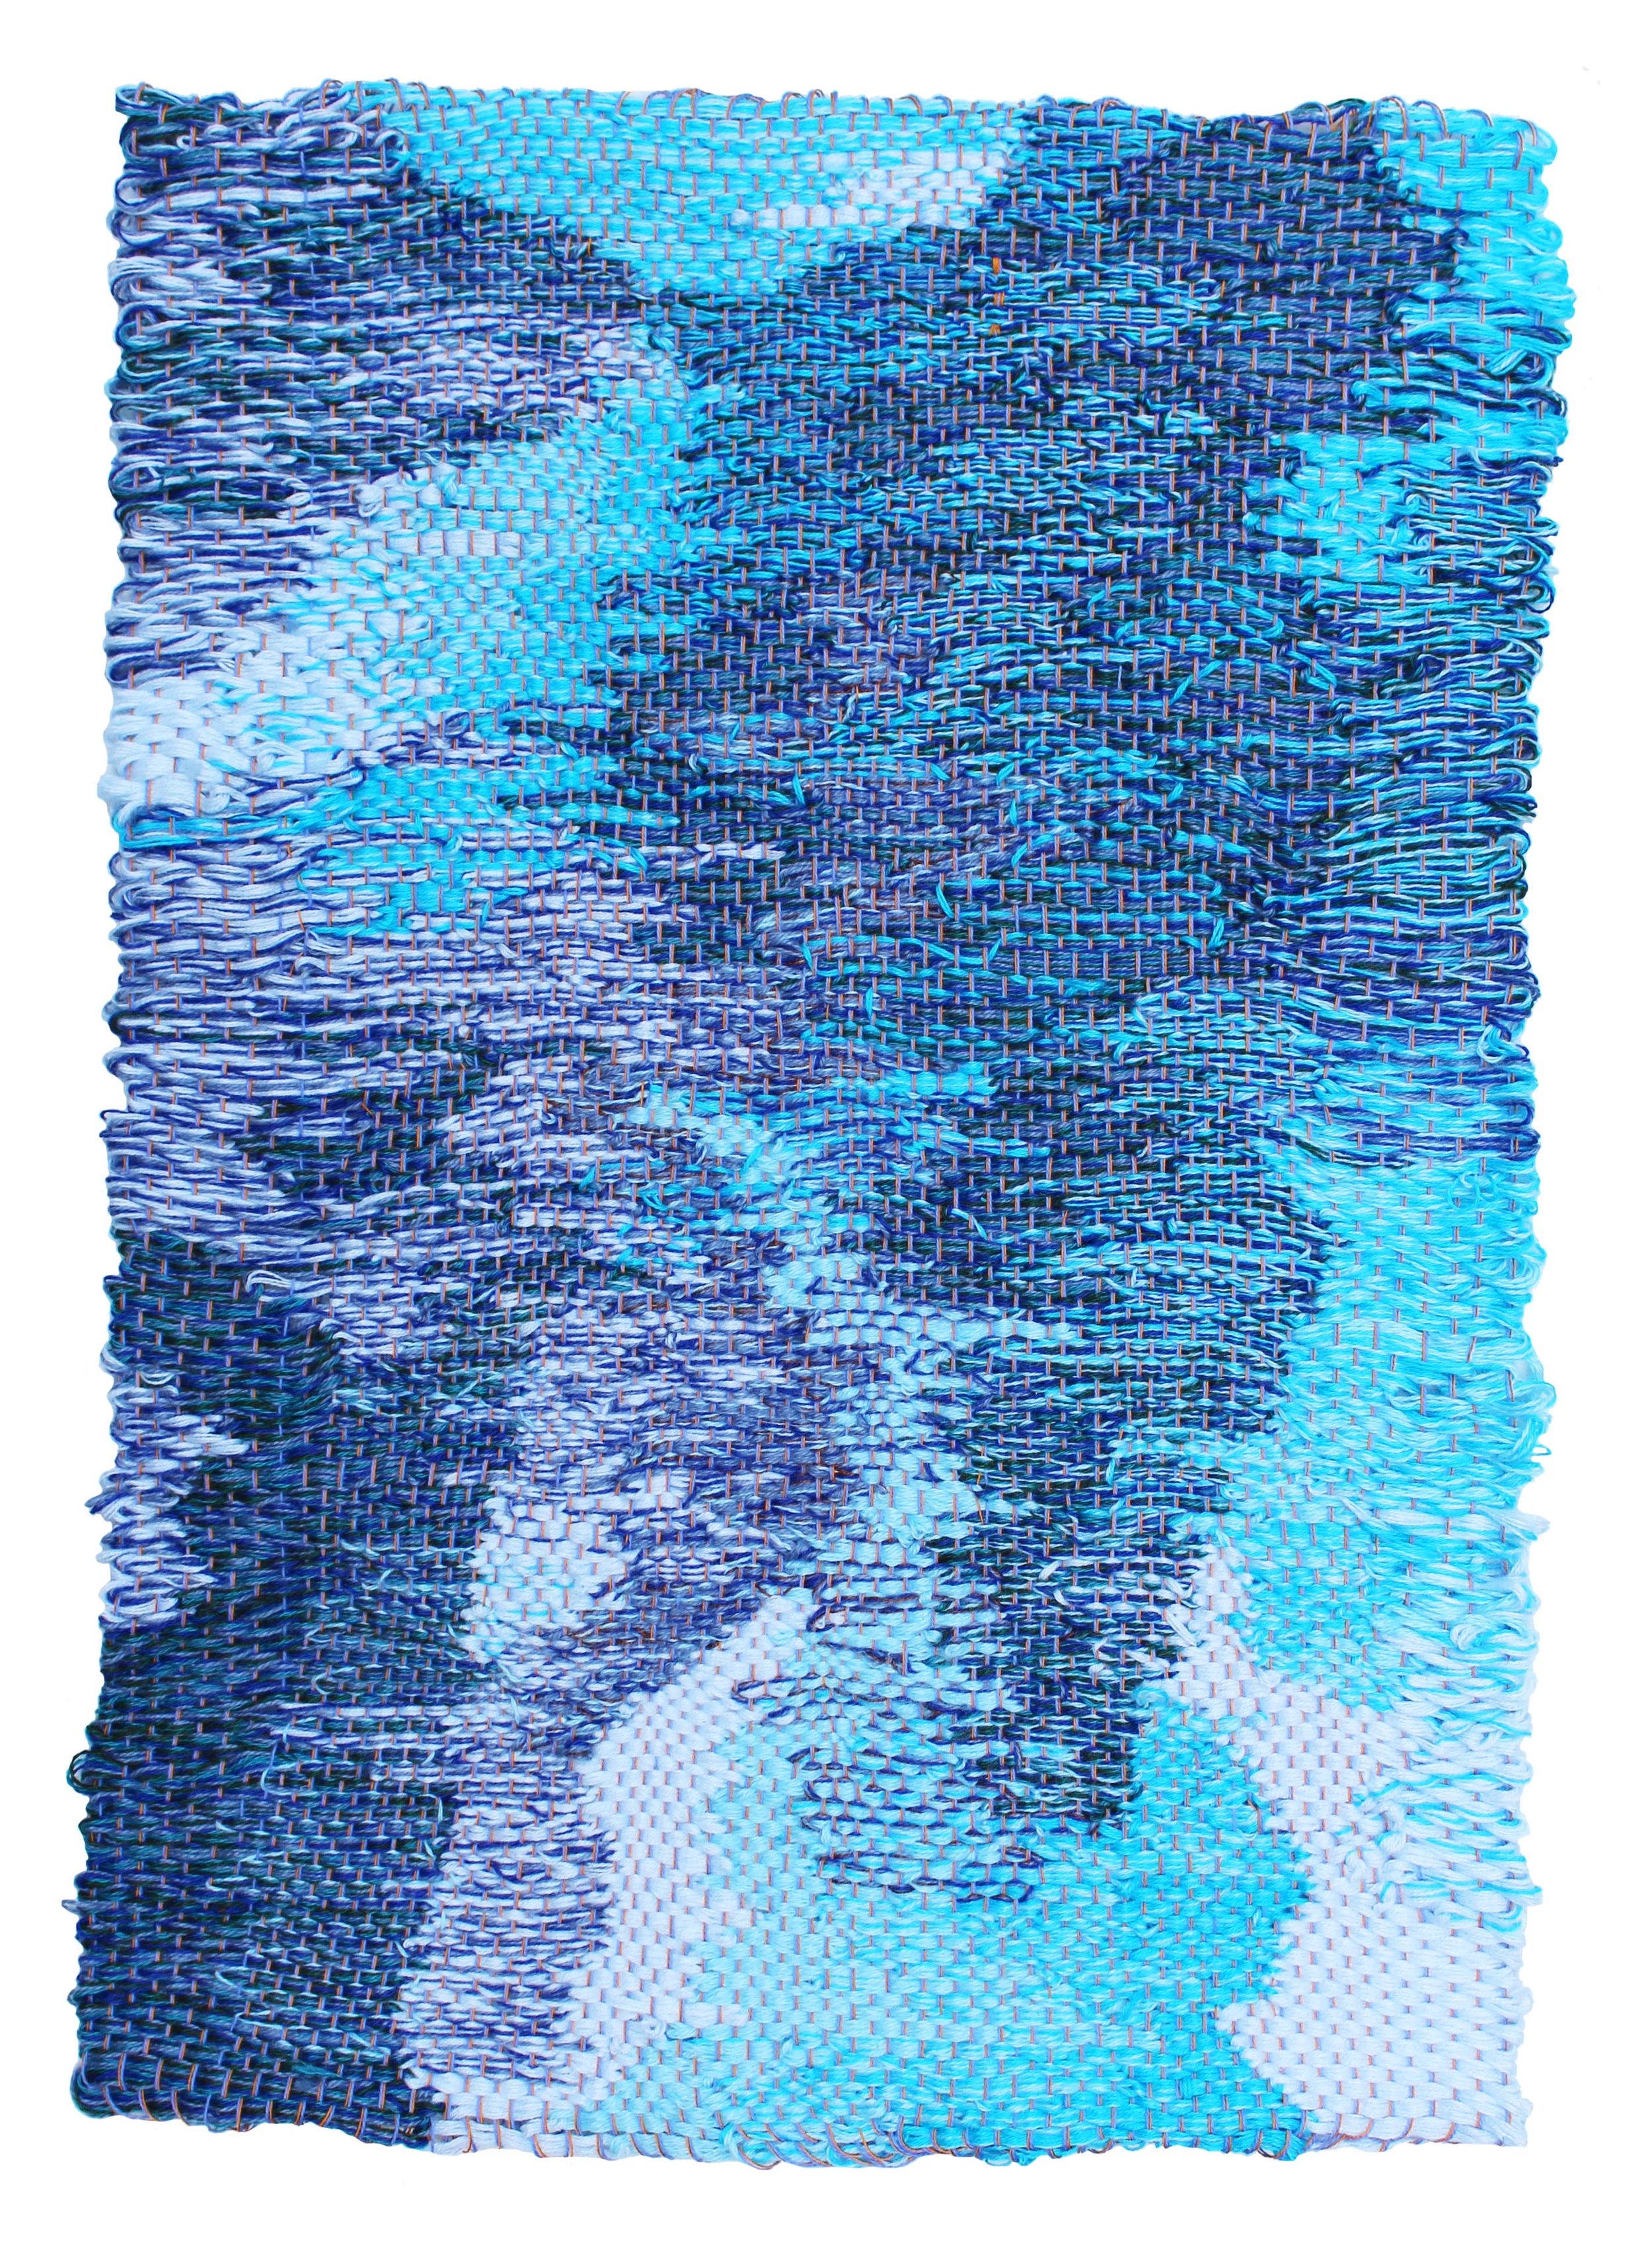 Water fingers, 30 x 22 cm, woven cotton, 2021 small.JPG